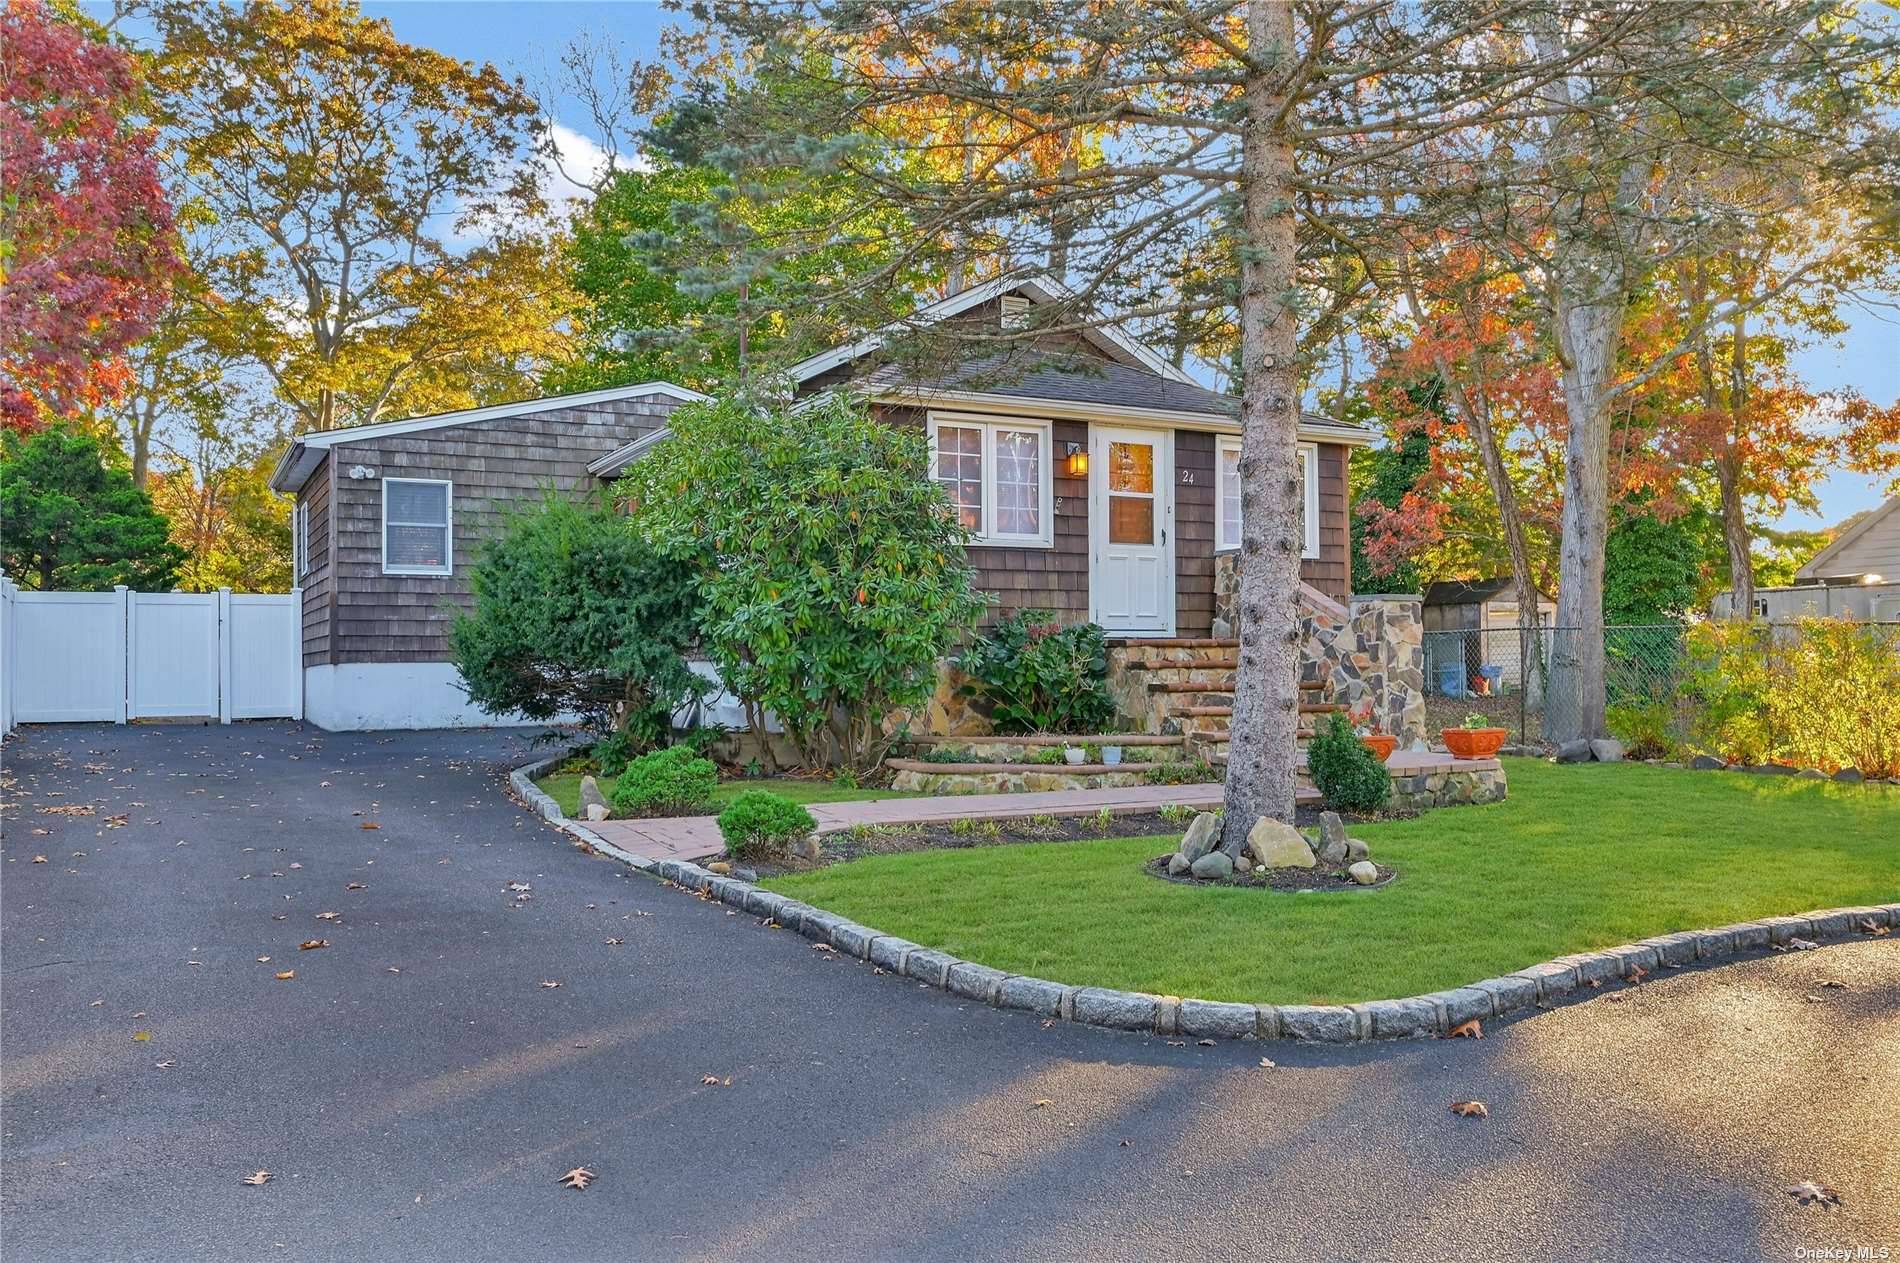 Charming, Completely Renovated 2 Bedroom 1 Full Bath Bungalow In Convenient Selden Mid Island Location !